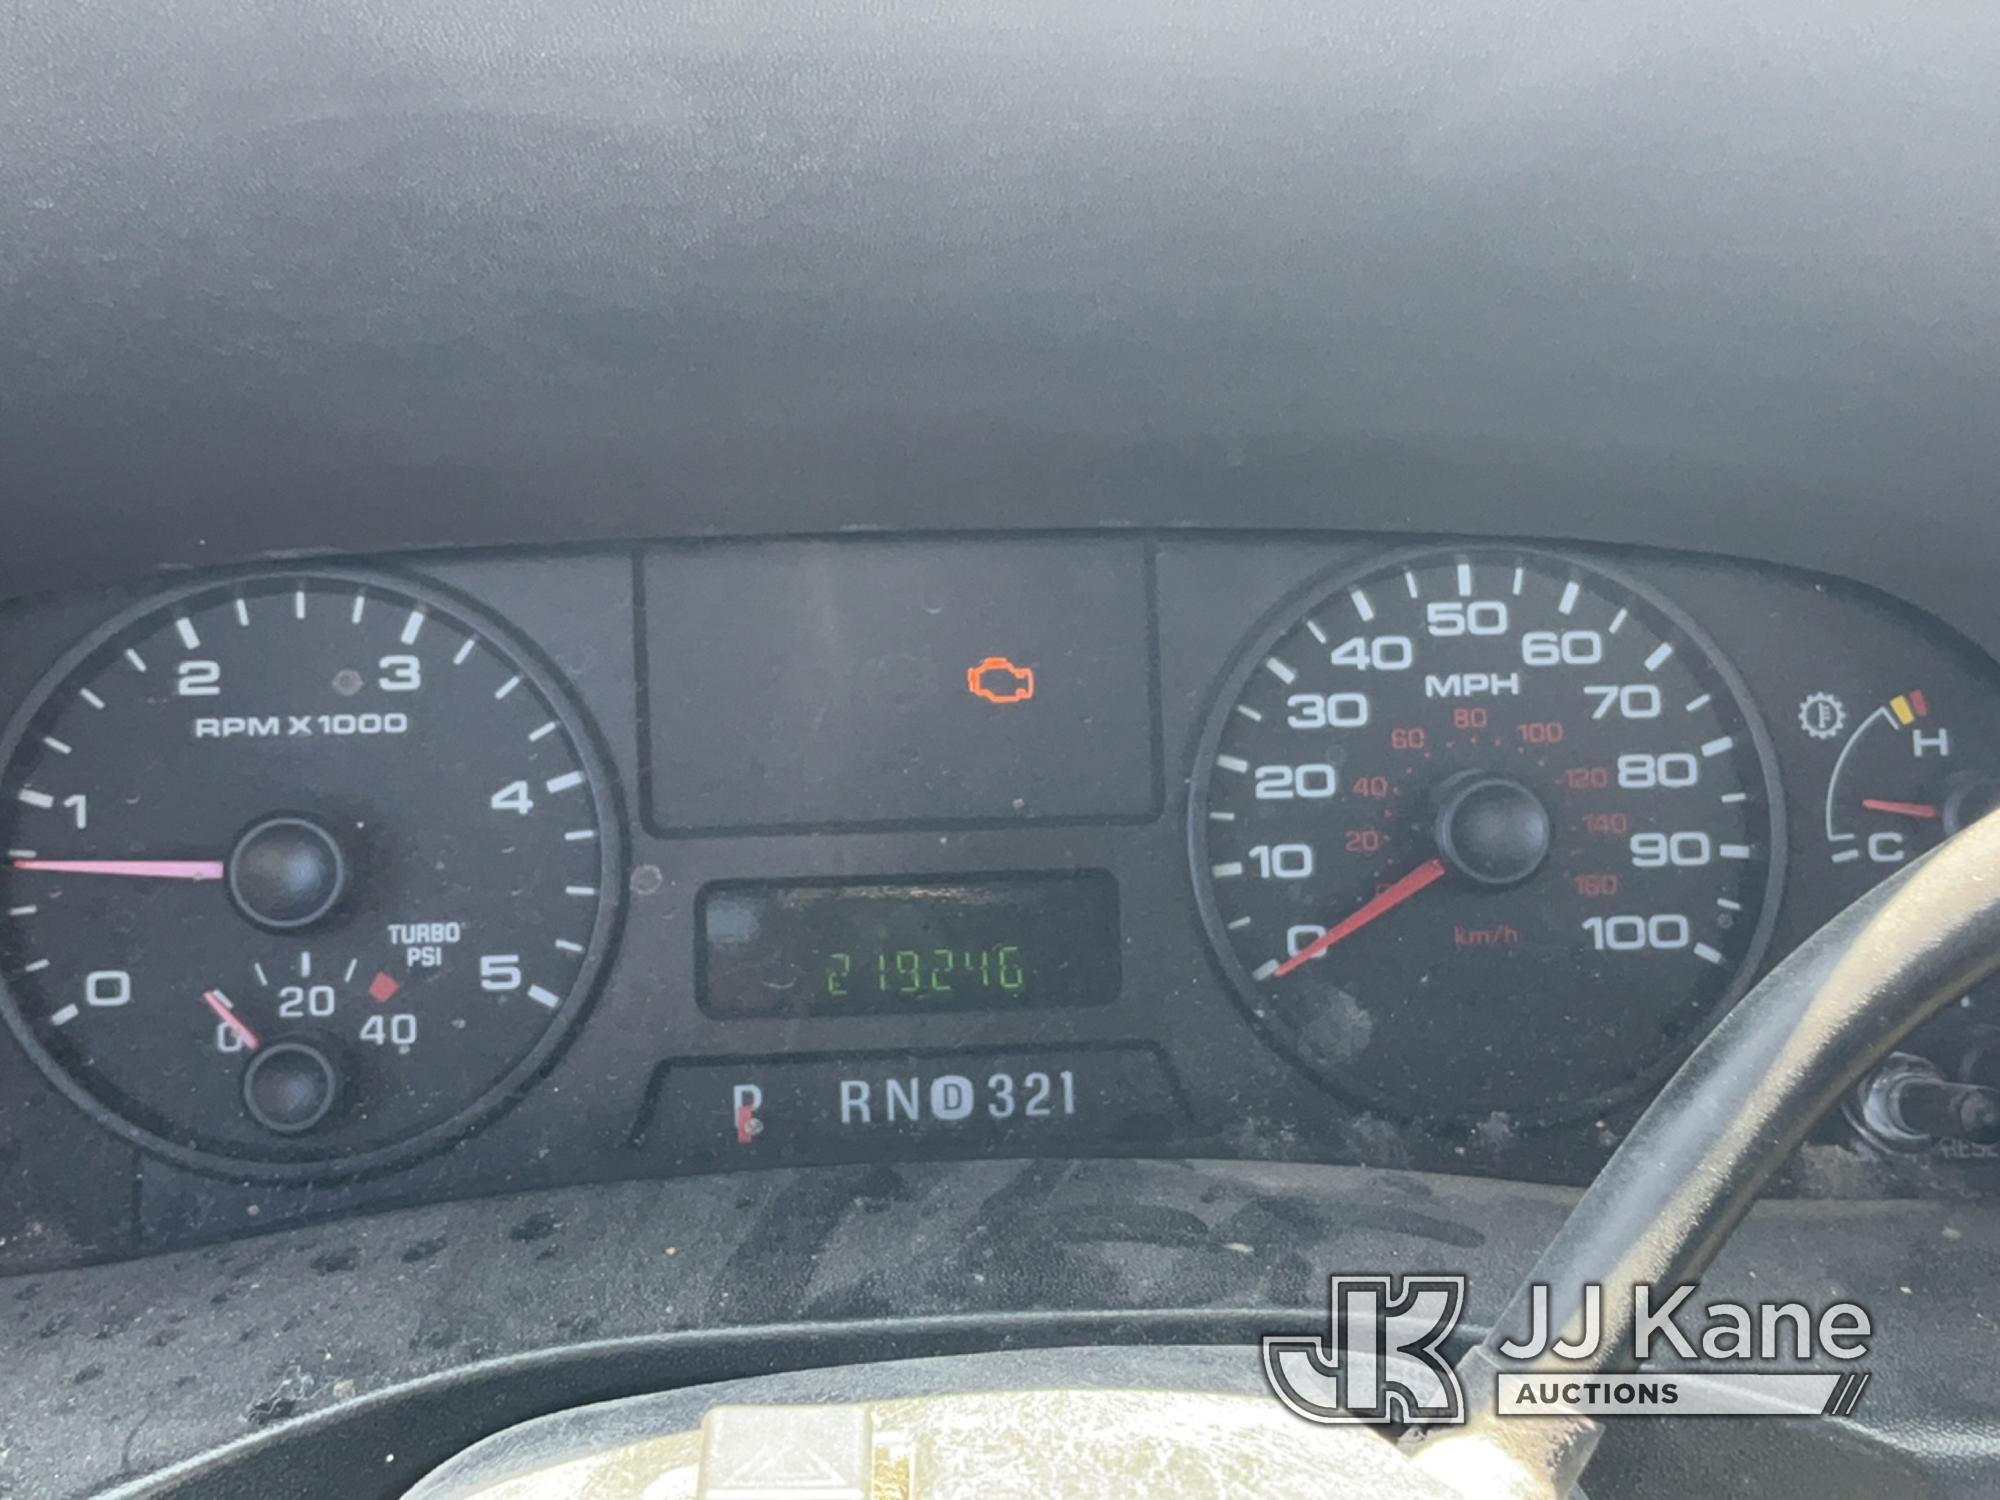 (Las Vegas, NV) 2006 Ford F450 Cab & Chassis Runs & Moves) (Check Engine Light On